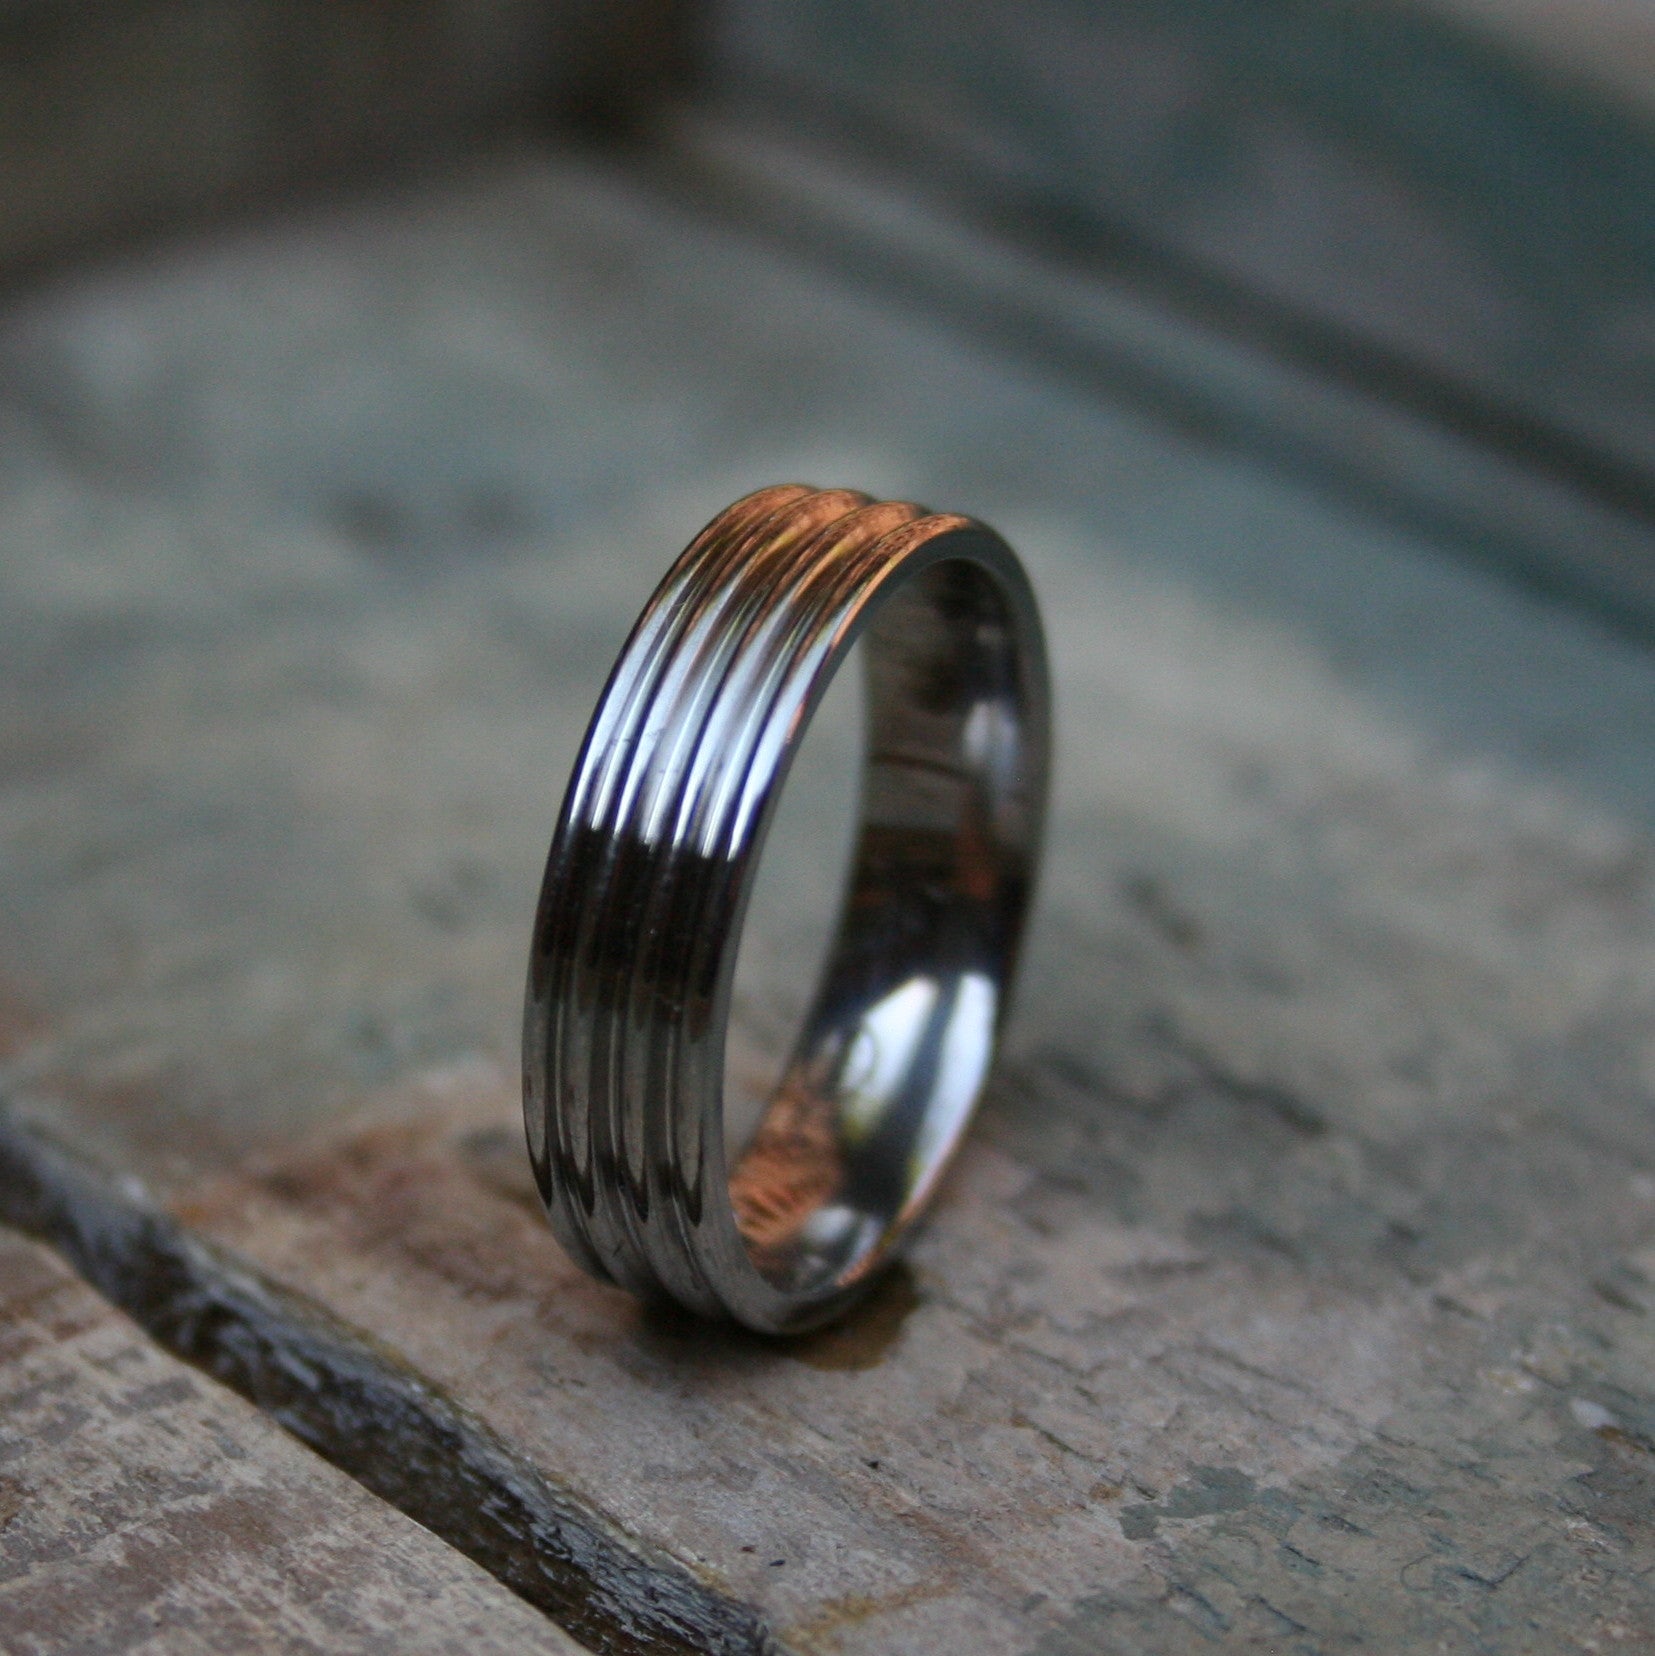 6mm Titanium with three grooves cut in. The ring is made with a comfort fit on the inside and a polished finish.